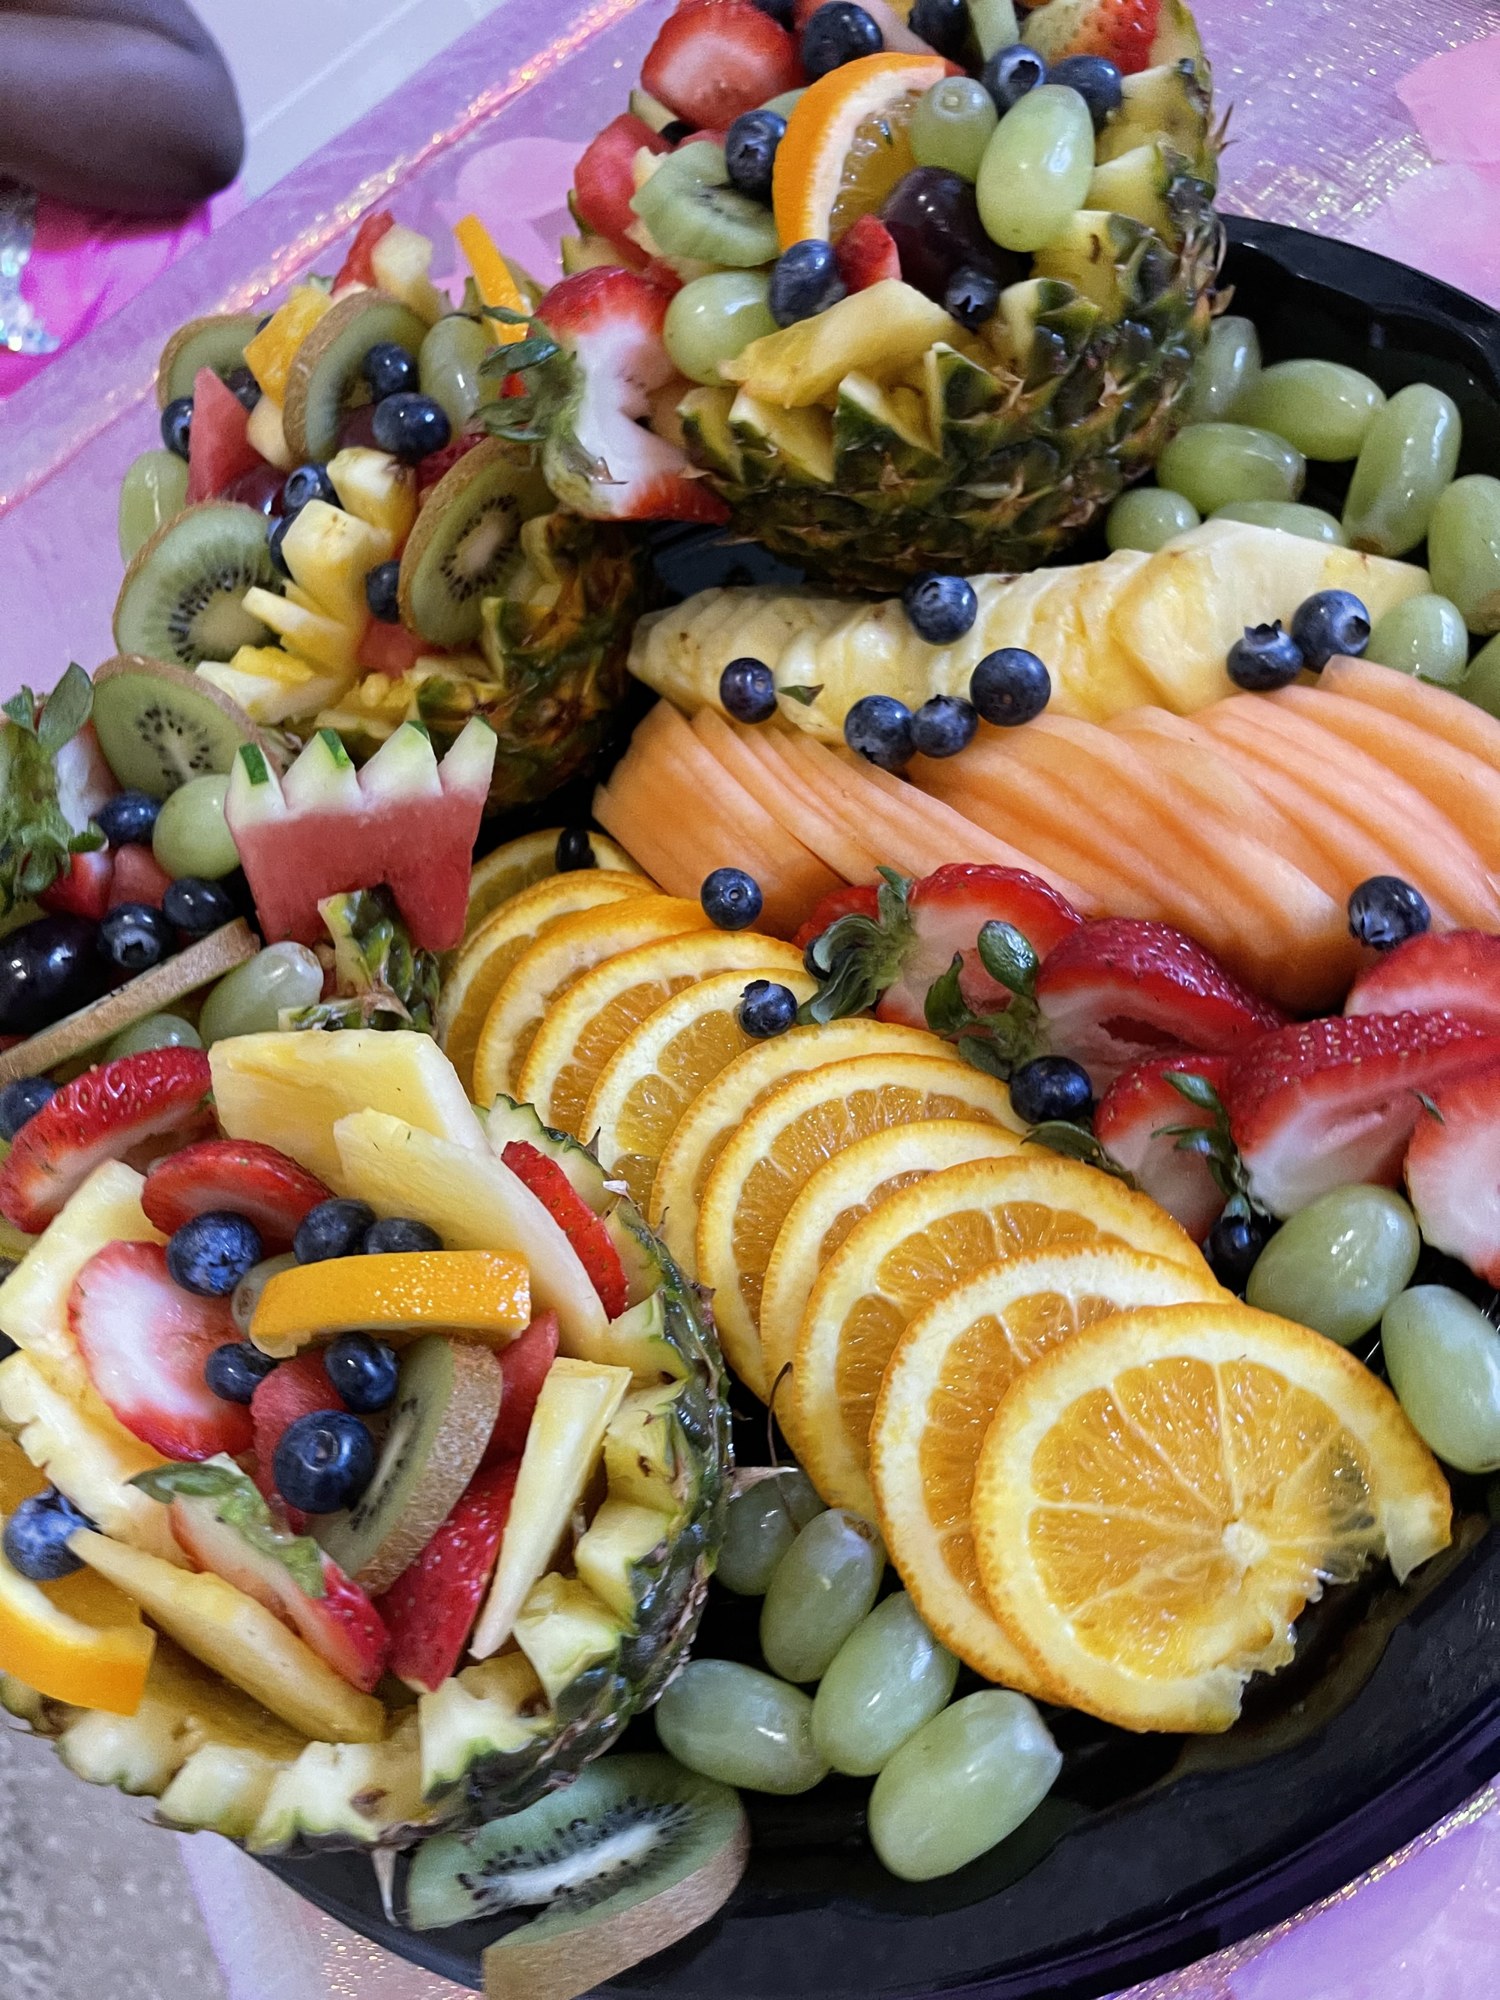 Fruit platter prices range from $15 to $80.